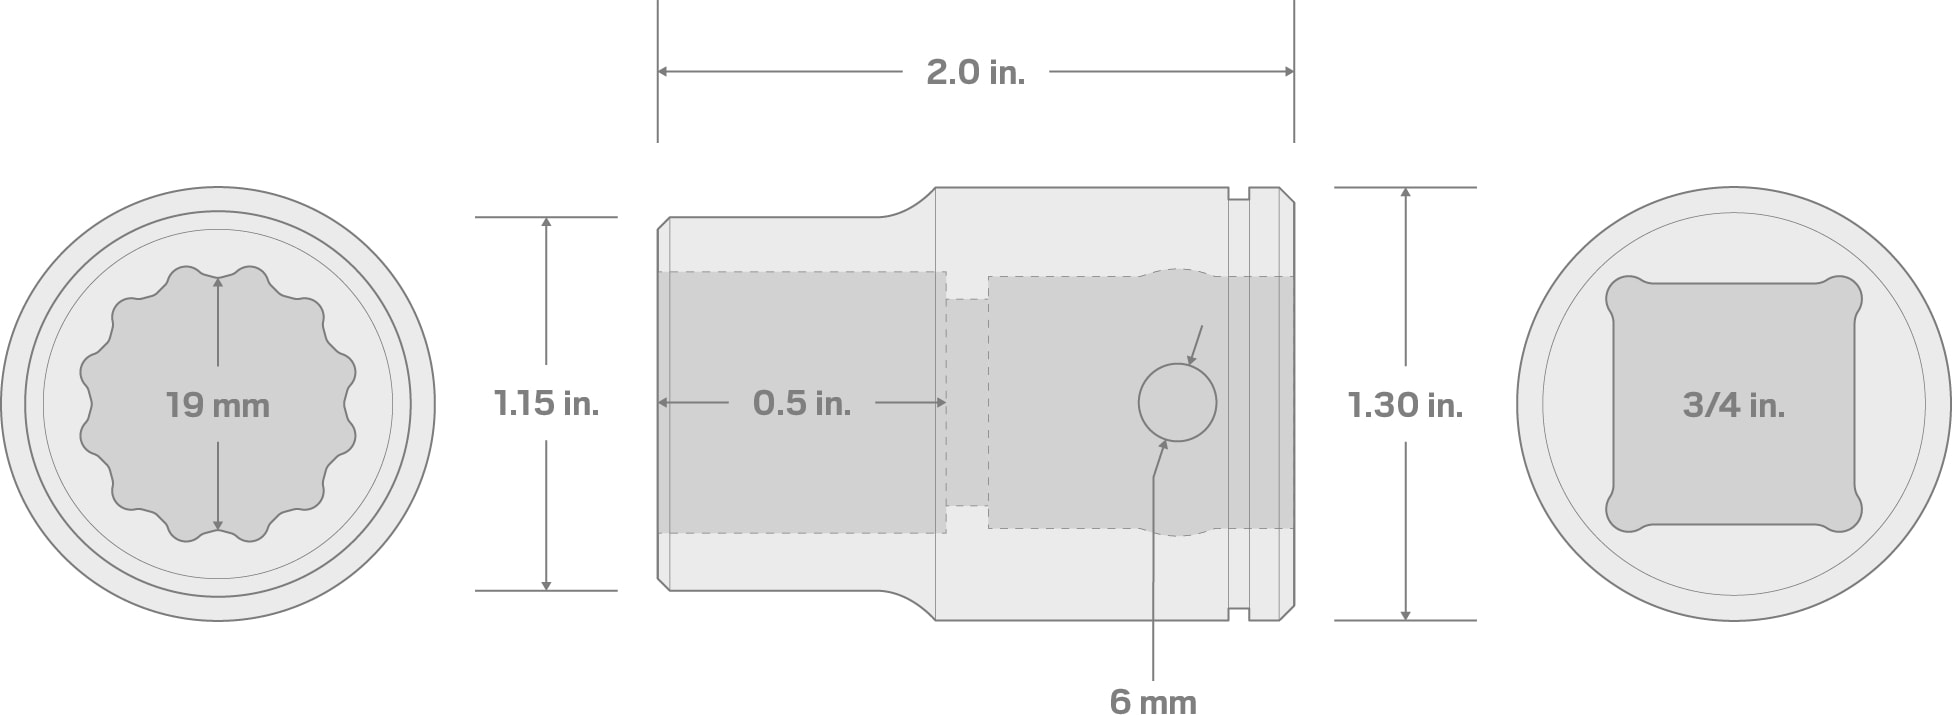 Specs for 3/4 Inch Drive x 19 mm 12-Point Socket